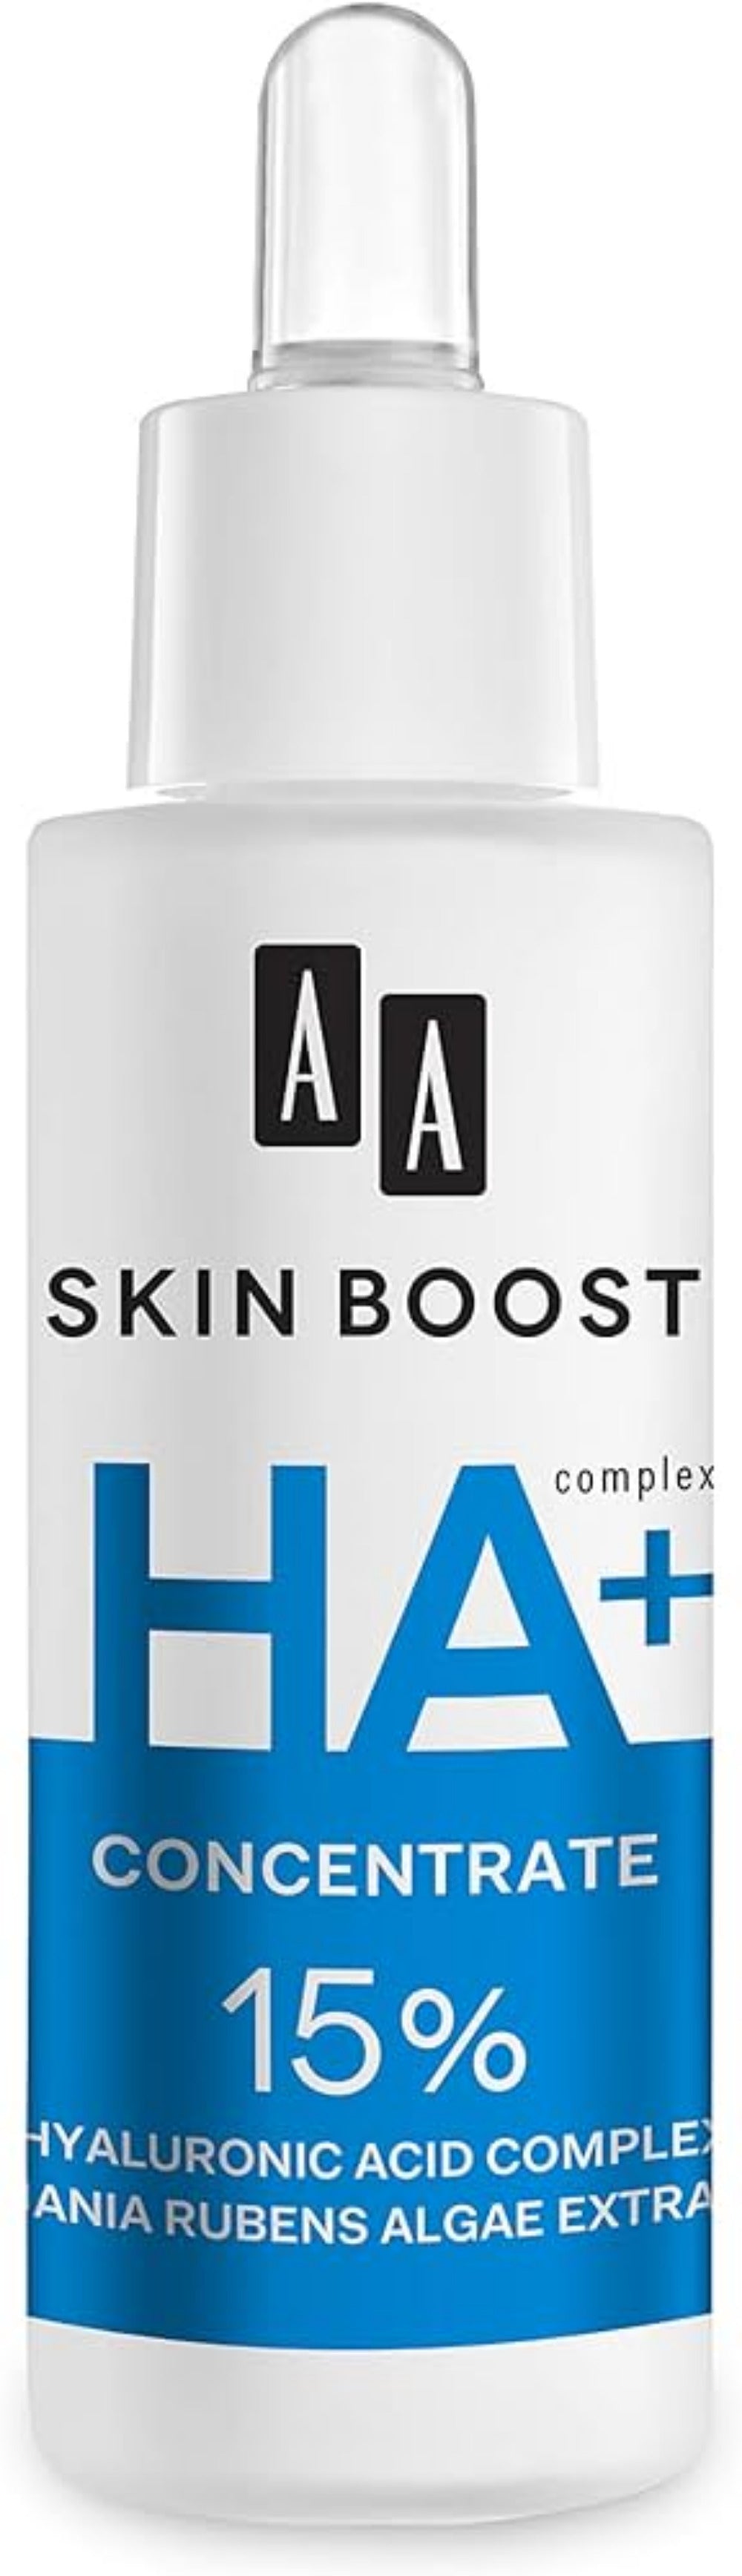 AA Skin Boost Concentrate 15%  Hyaluronic Acid Complex - 30 ml